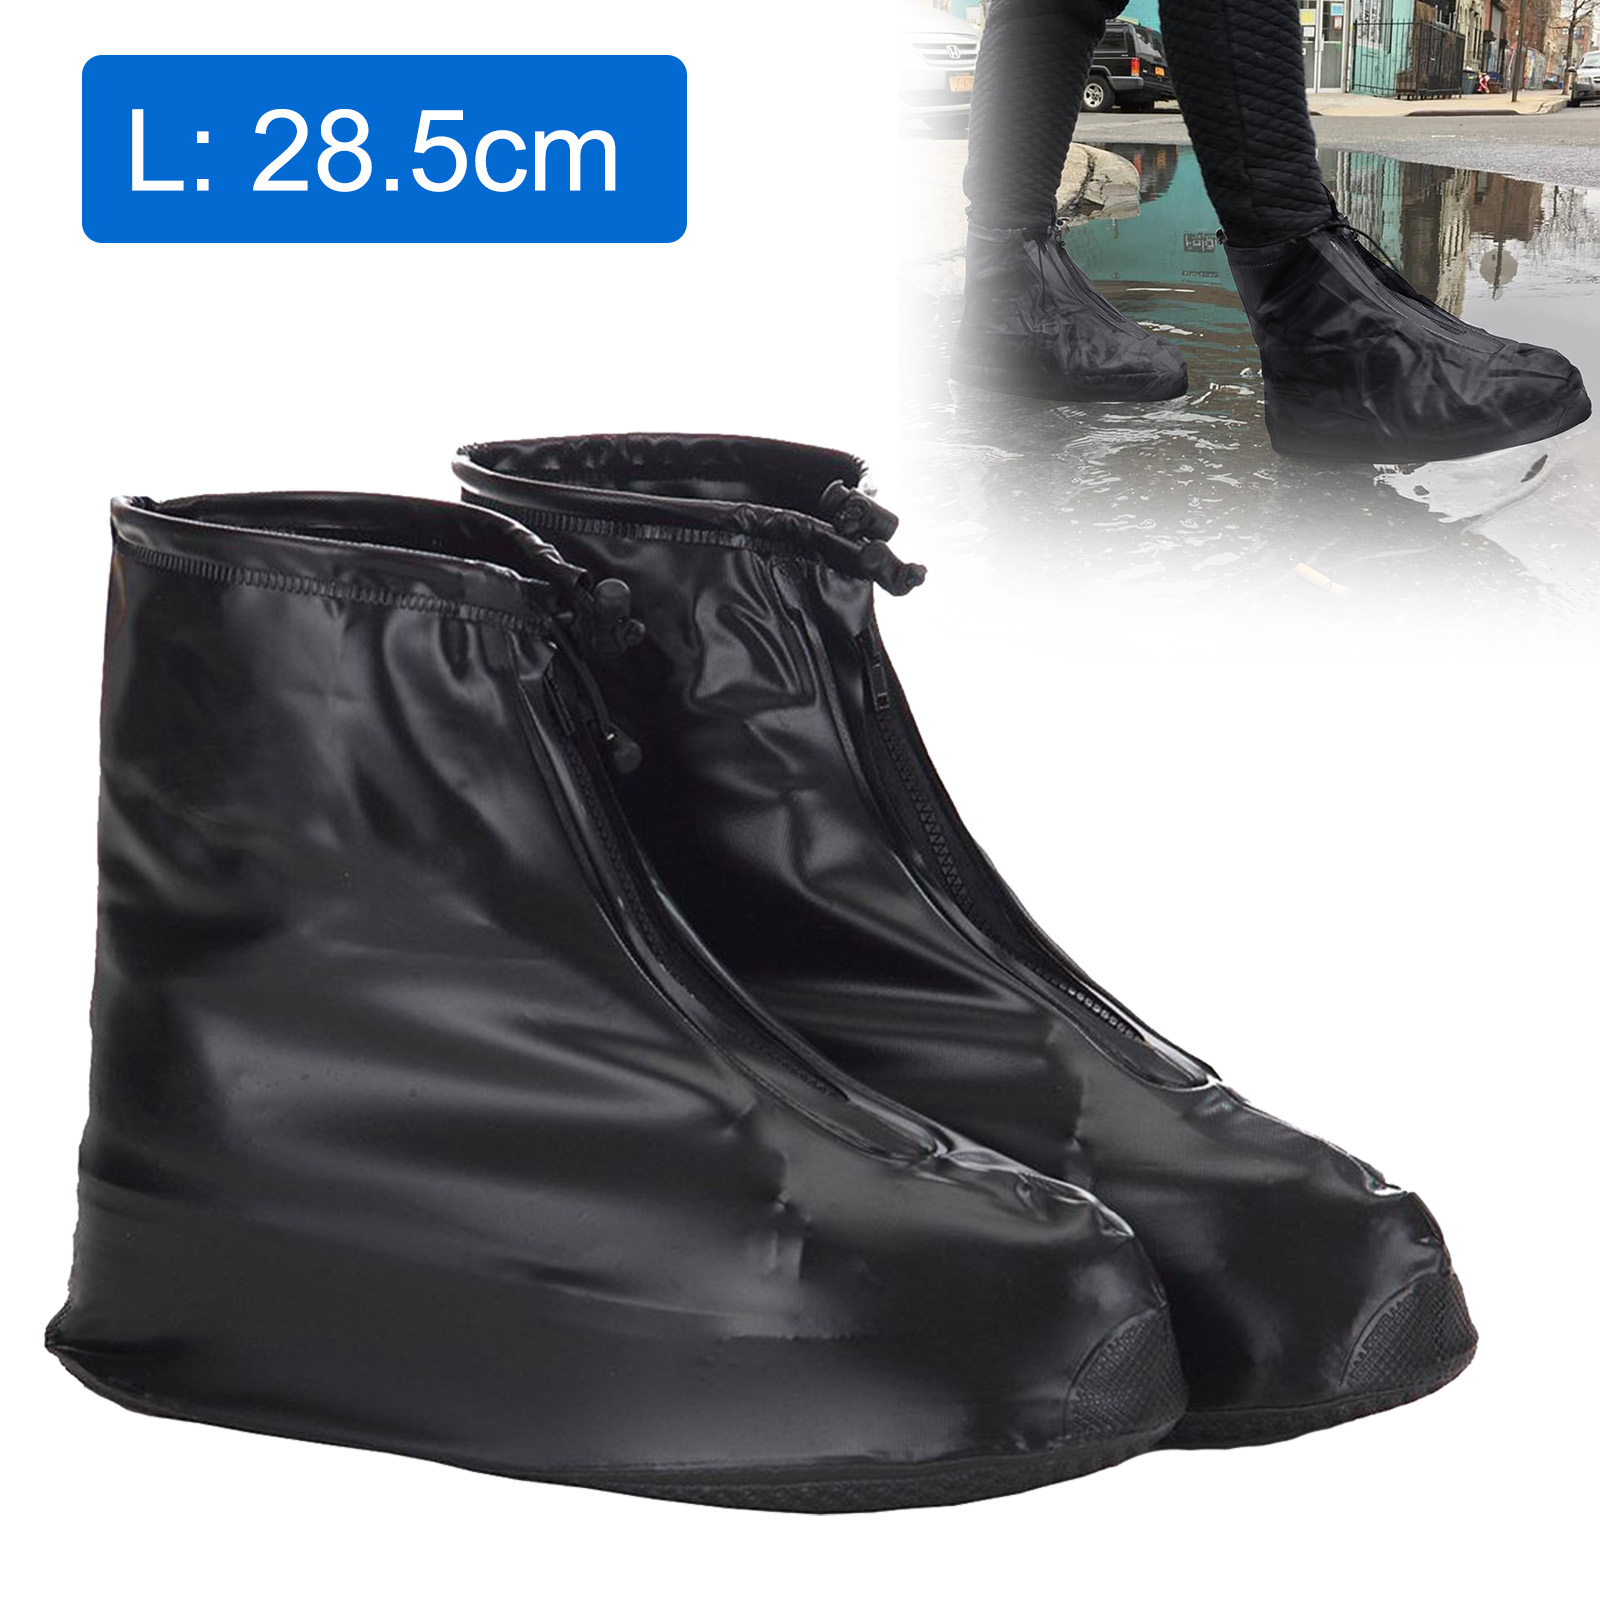 Cycling Shoes Covers Waterproof Outdoor Reusable Rain Snow Overshoes Boots 